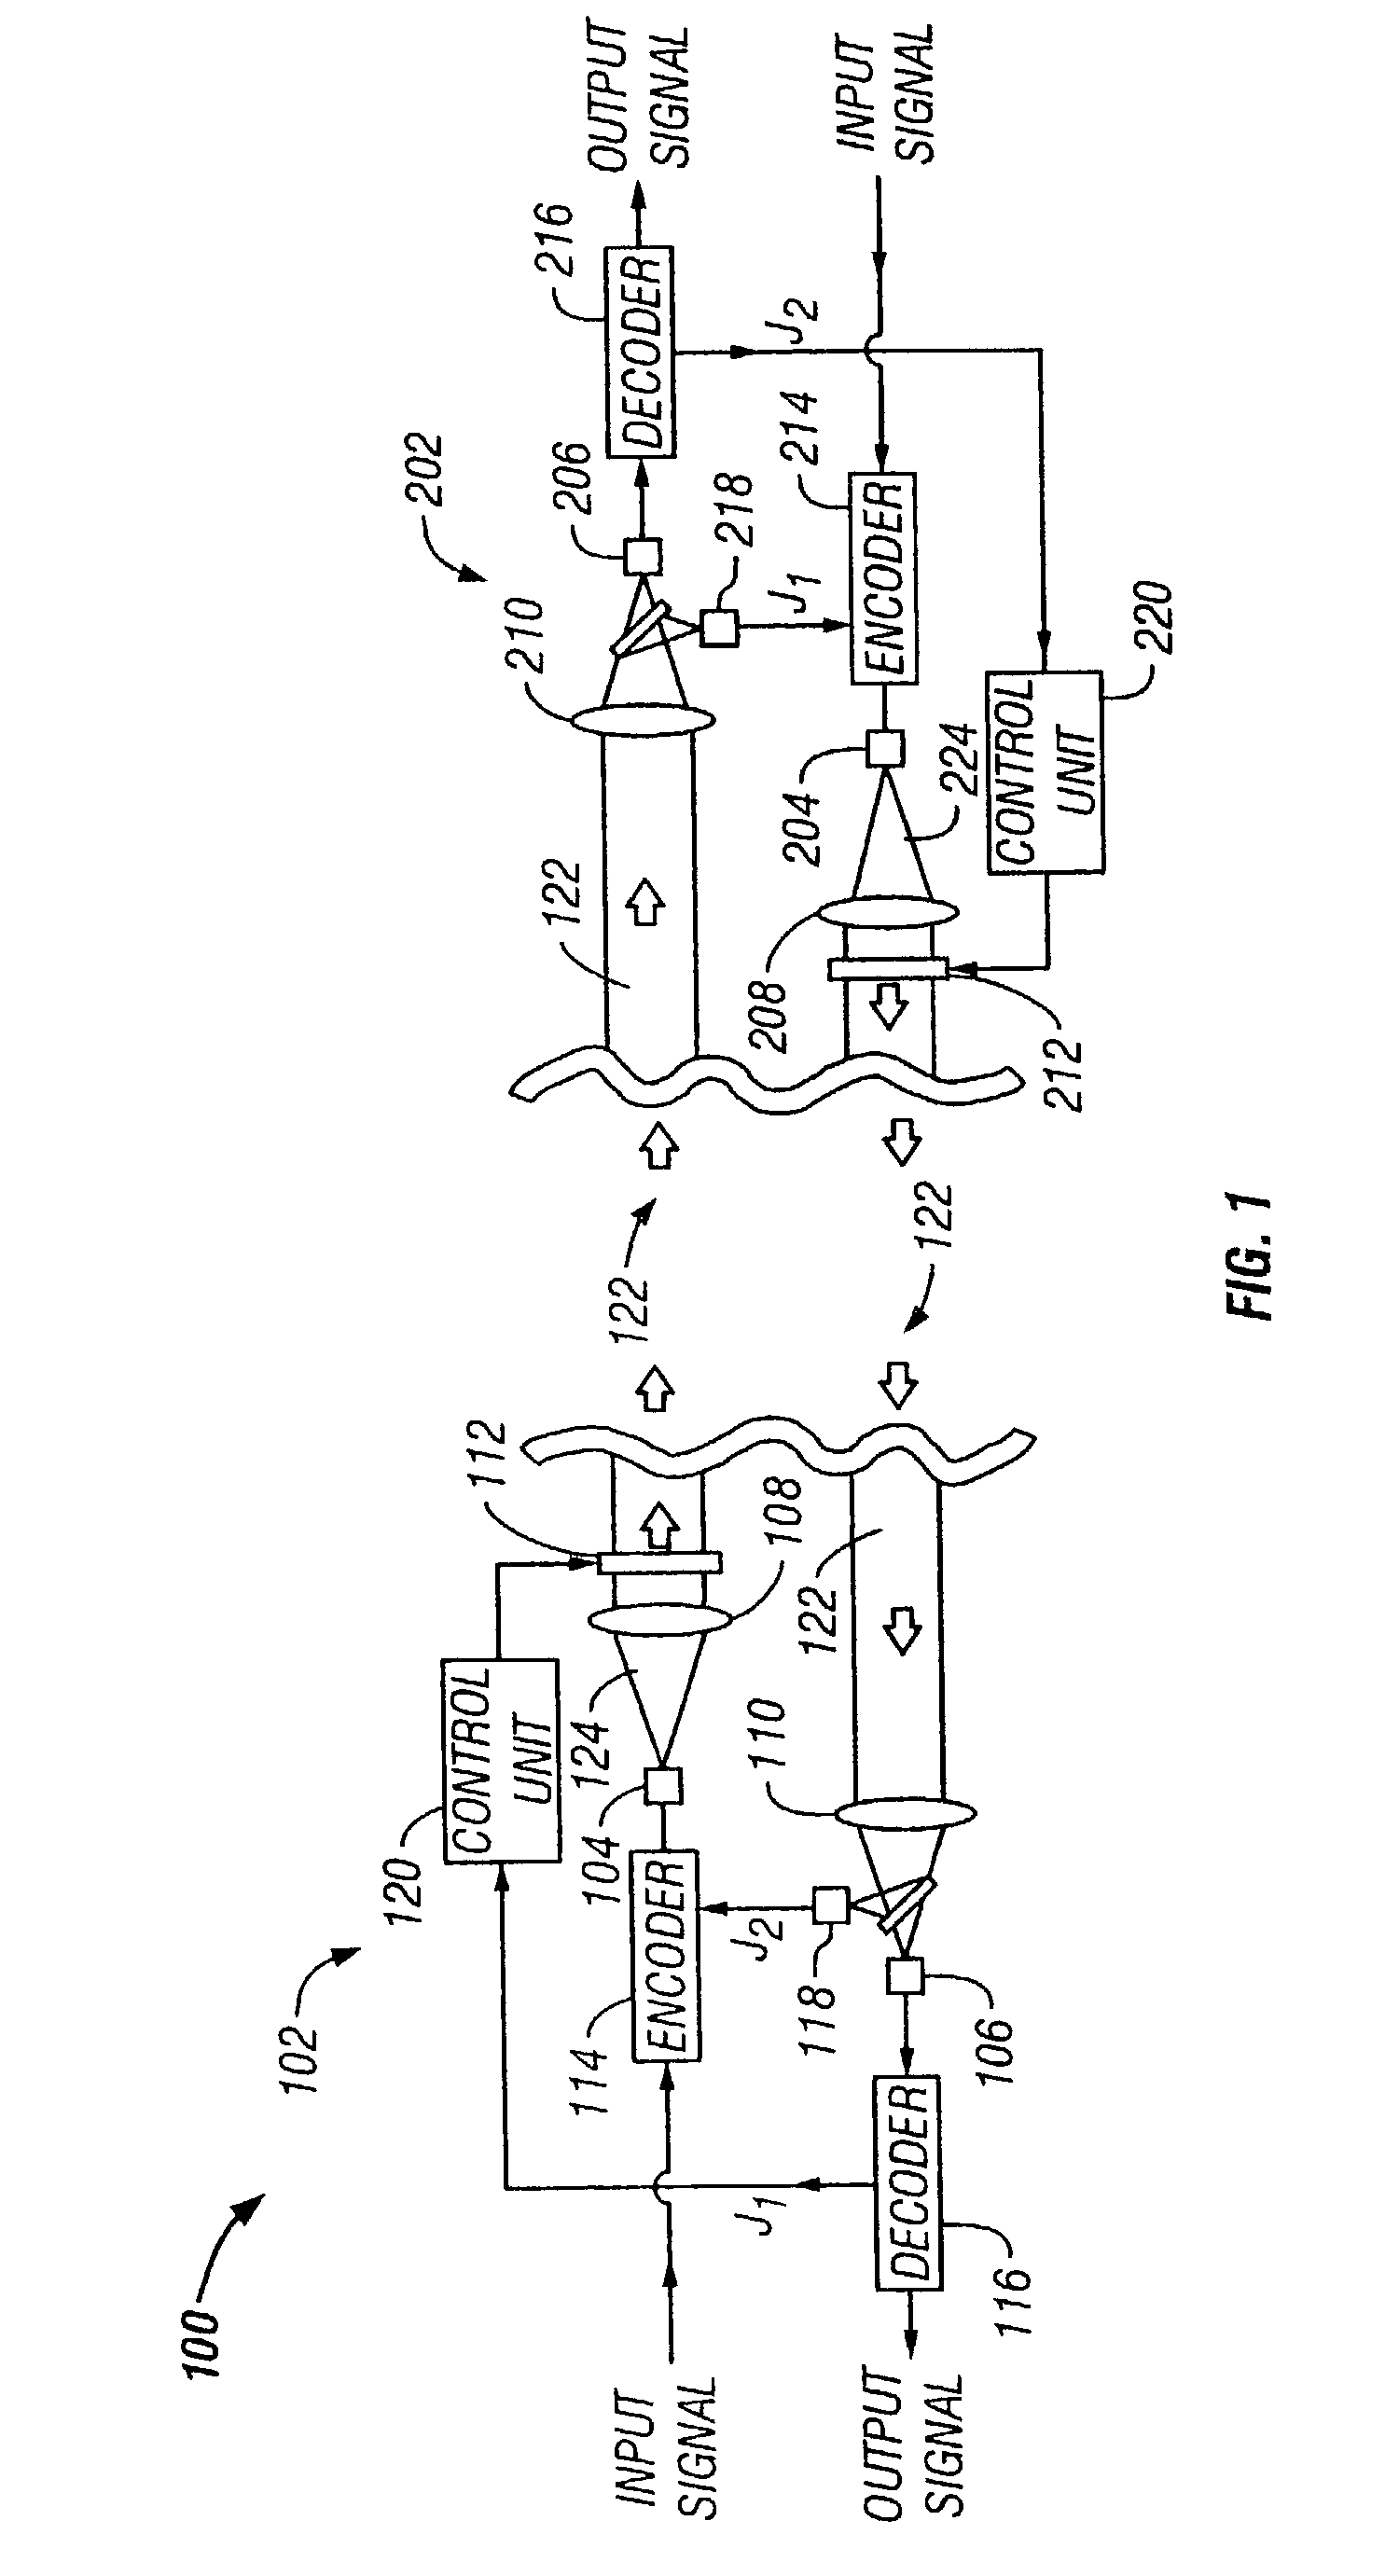 Adaptive correction of wave-front phase distortions in a free-space laser communication system and method